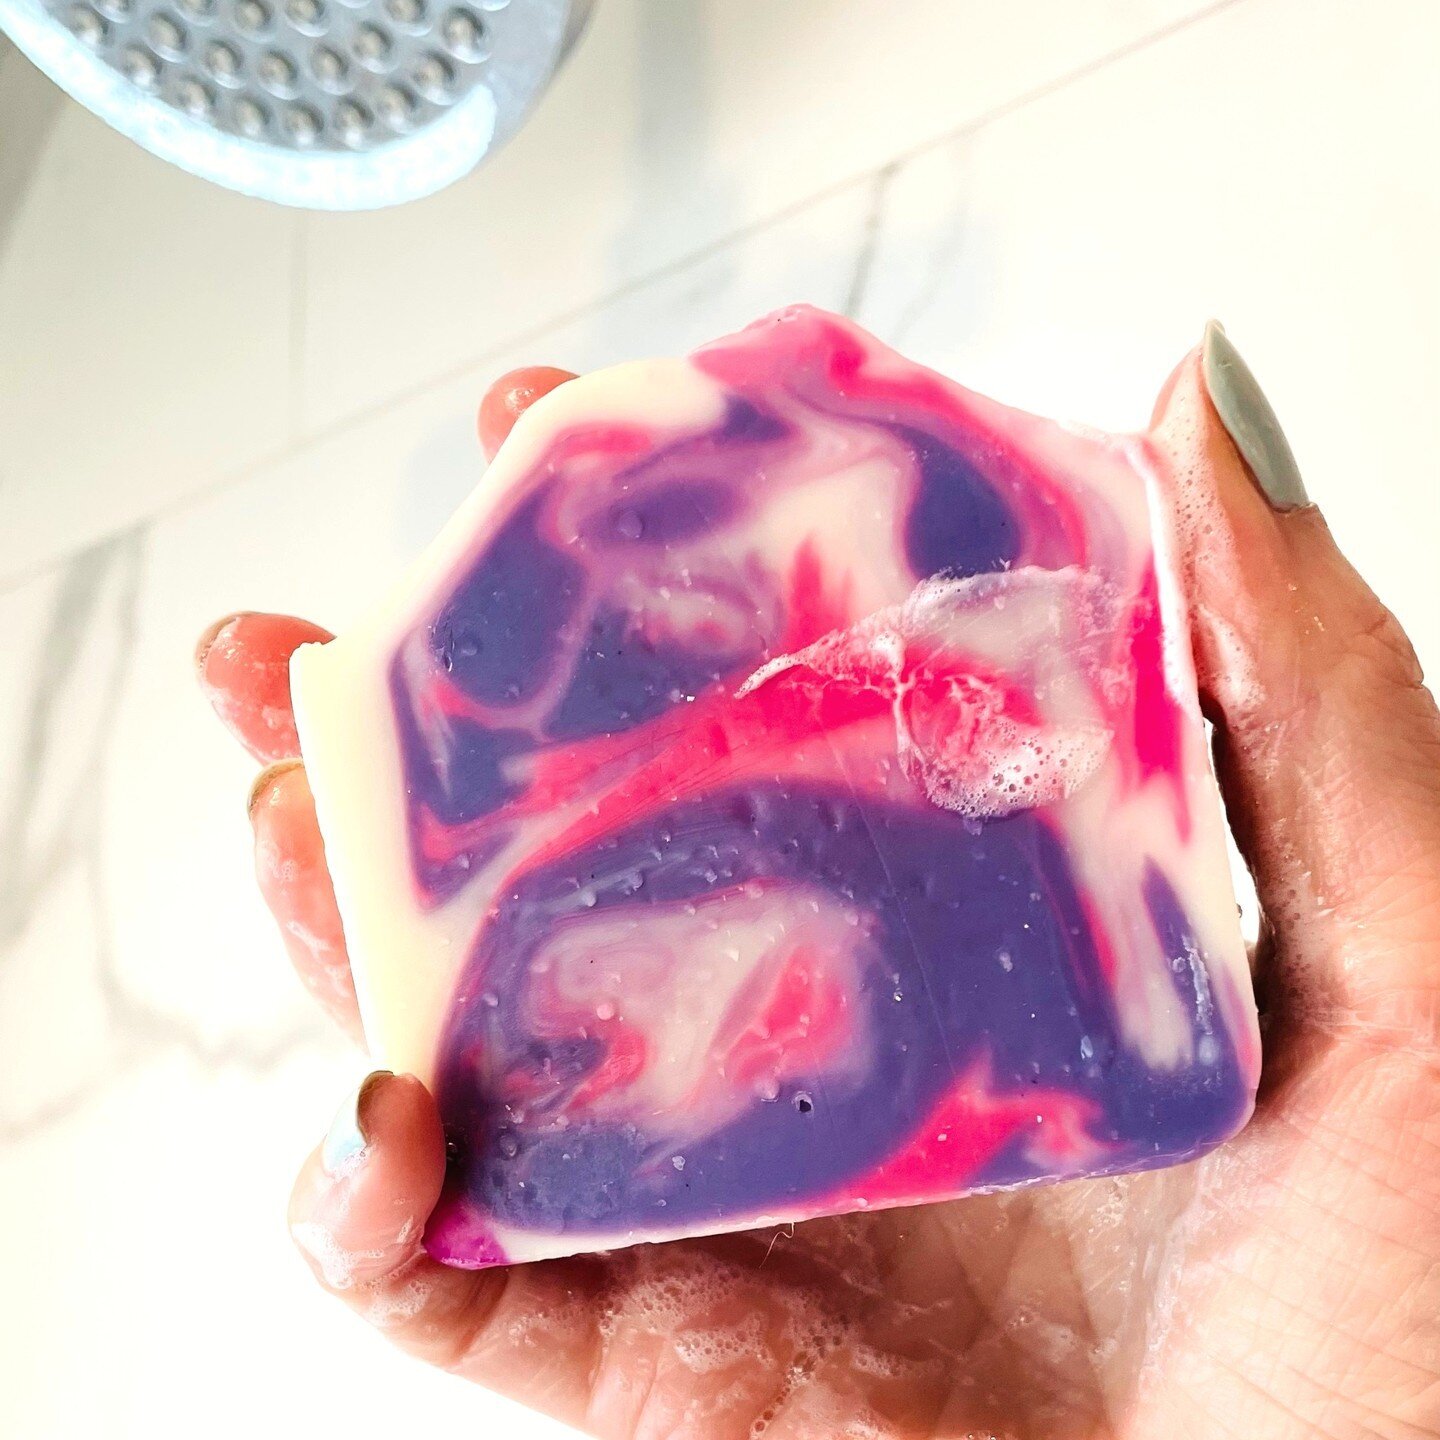 Do you want to be more eco-friendly?⁠
.⁠
Soap bars are an easy addition to your household. ⁠
.⁠
Soap Bars use less water to make, are plastic free and last longer than a liquid soap!⁠
.⁠
They are handmade and naturally derived, no dyes and heavy perf